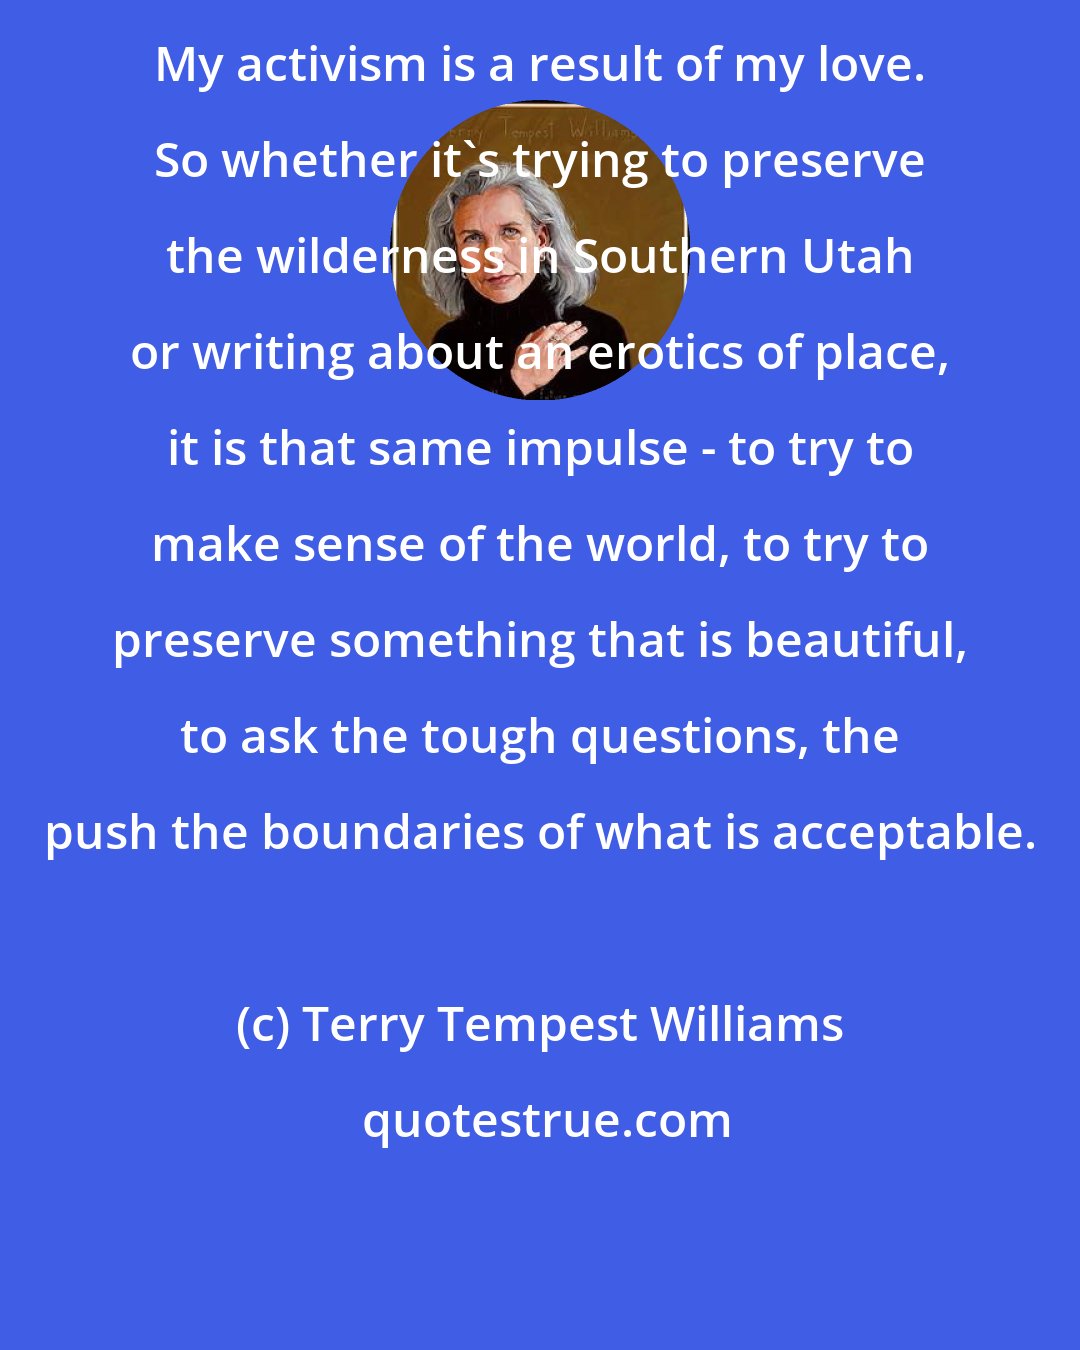 Terry Tempest Williams: My activism is a result of my love. So whether it's trying to preserve the wilderness in Southern Utah or writing about an erotics of place, it is that same impulse - to try to make sense of the world, to try to preserve something that is beautiful, to ask the tough questions, the push the boundaries of what is acceptable.